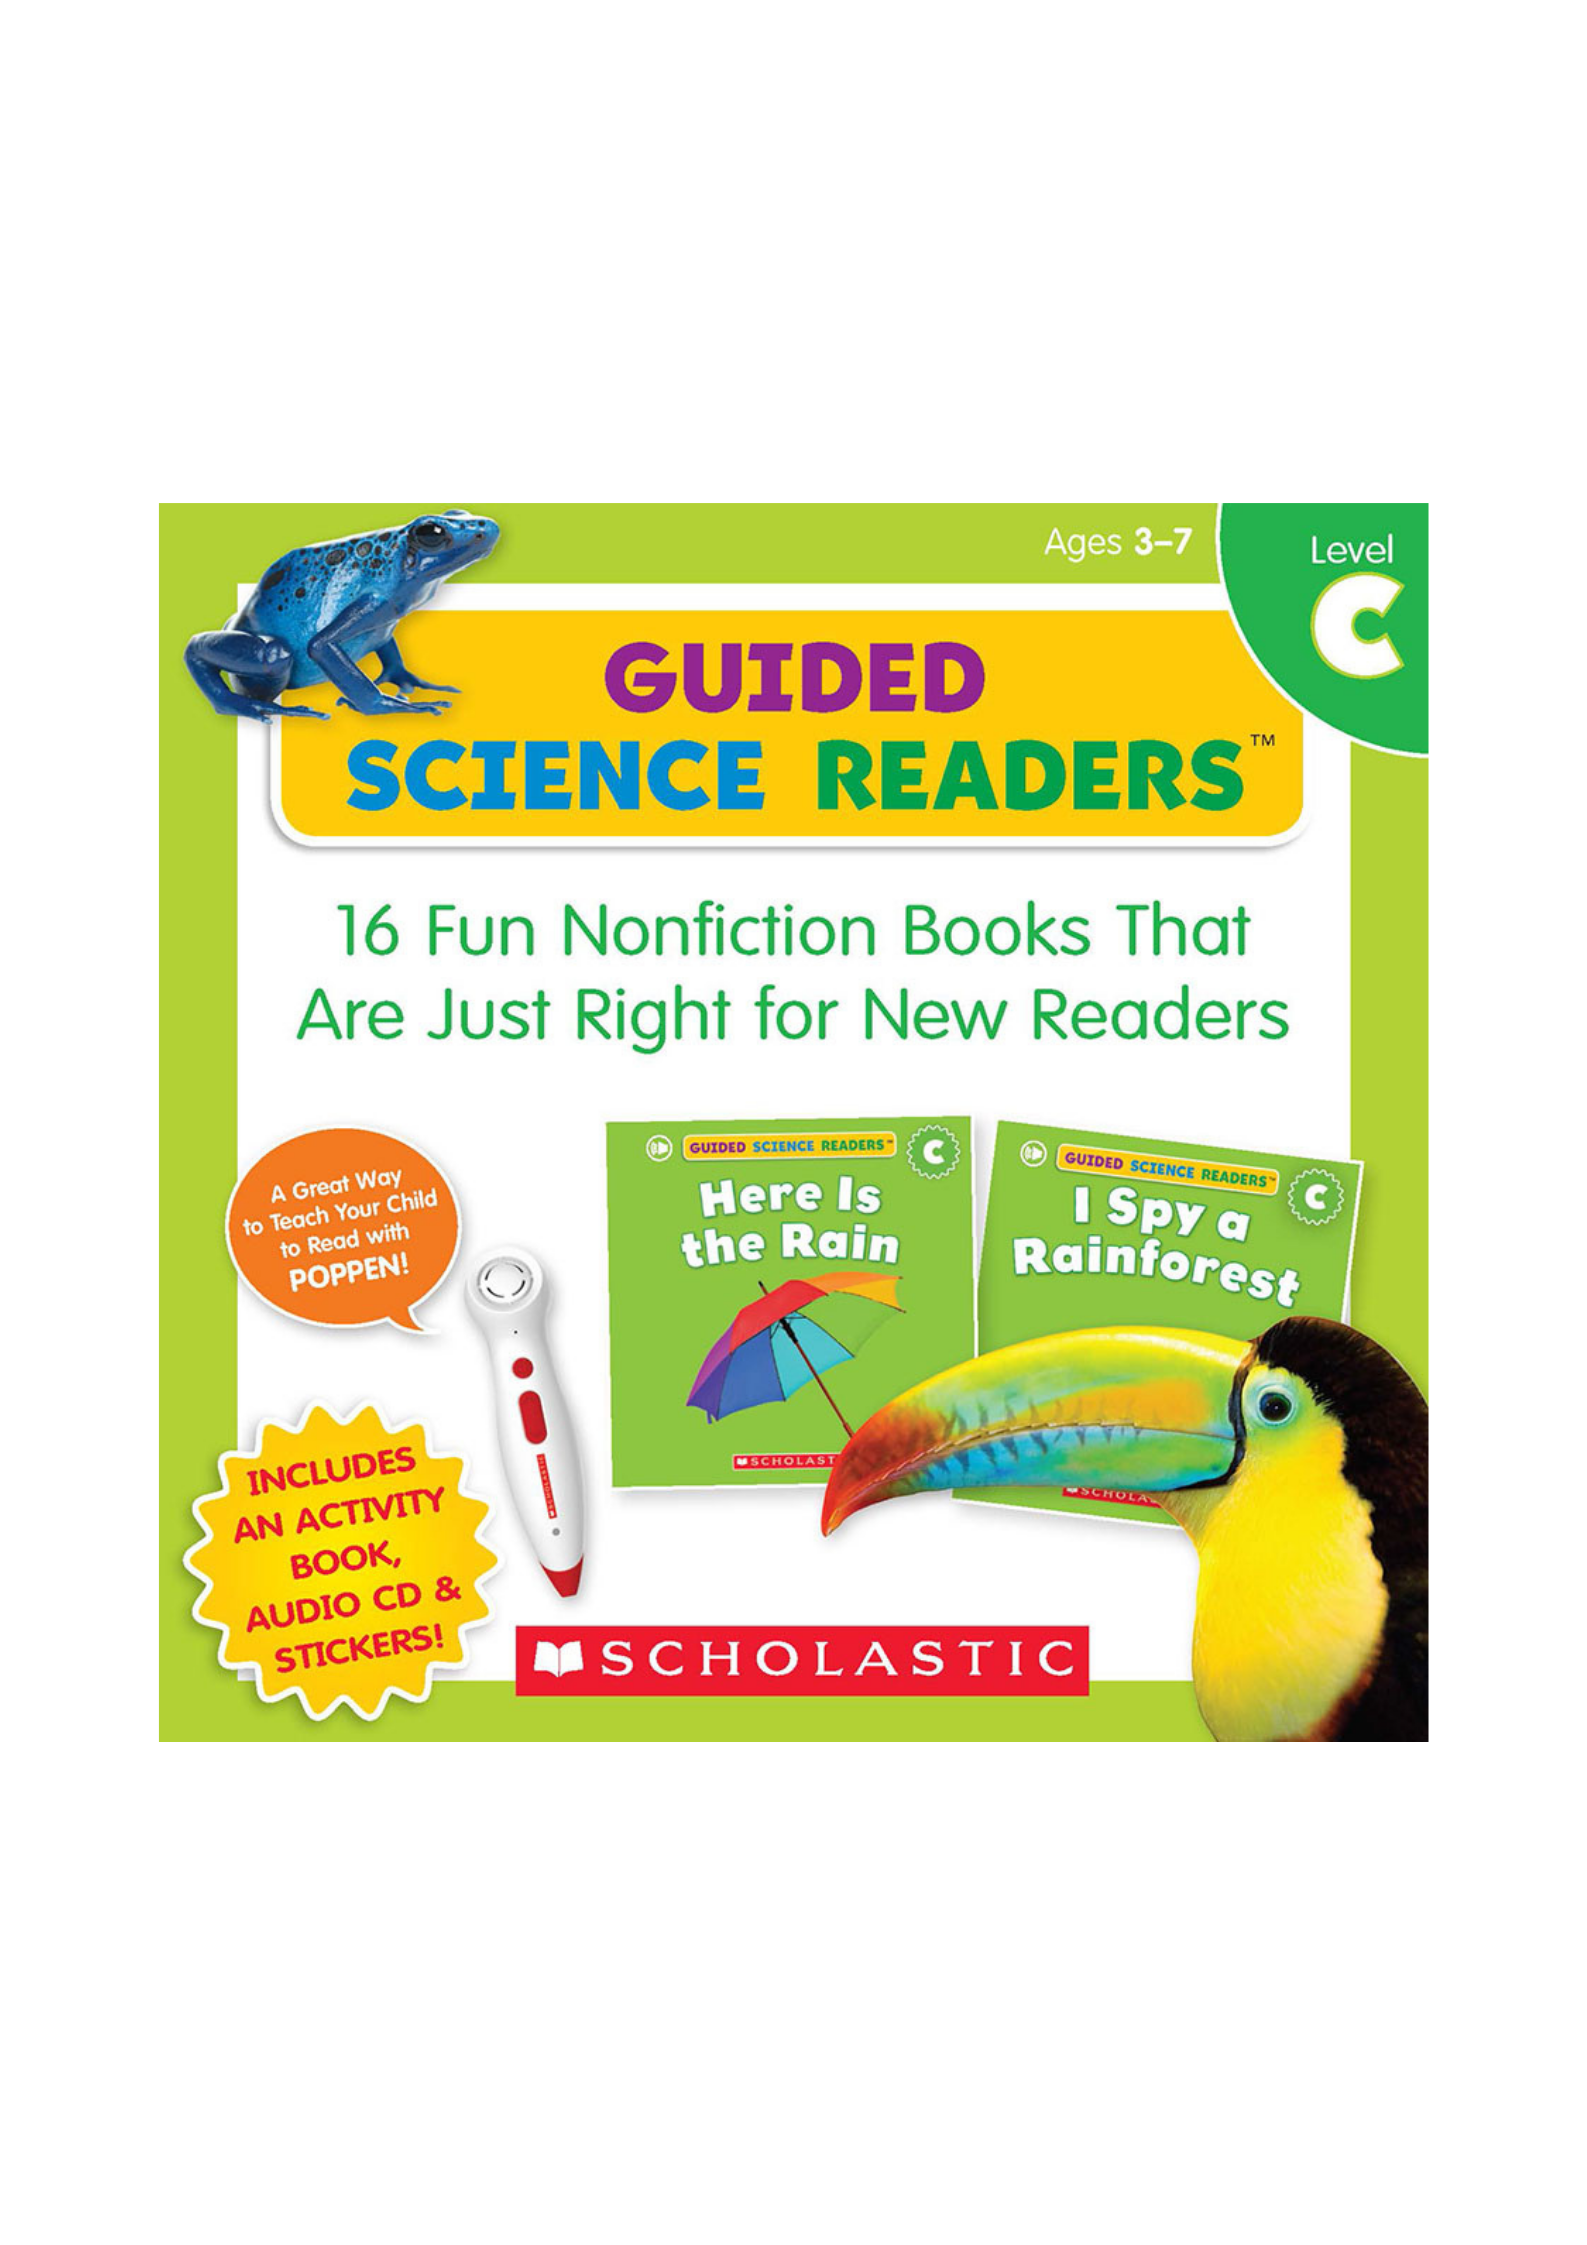 Guided Science Readers Level C